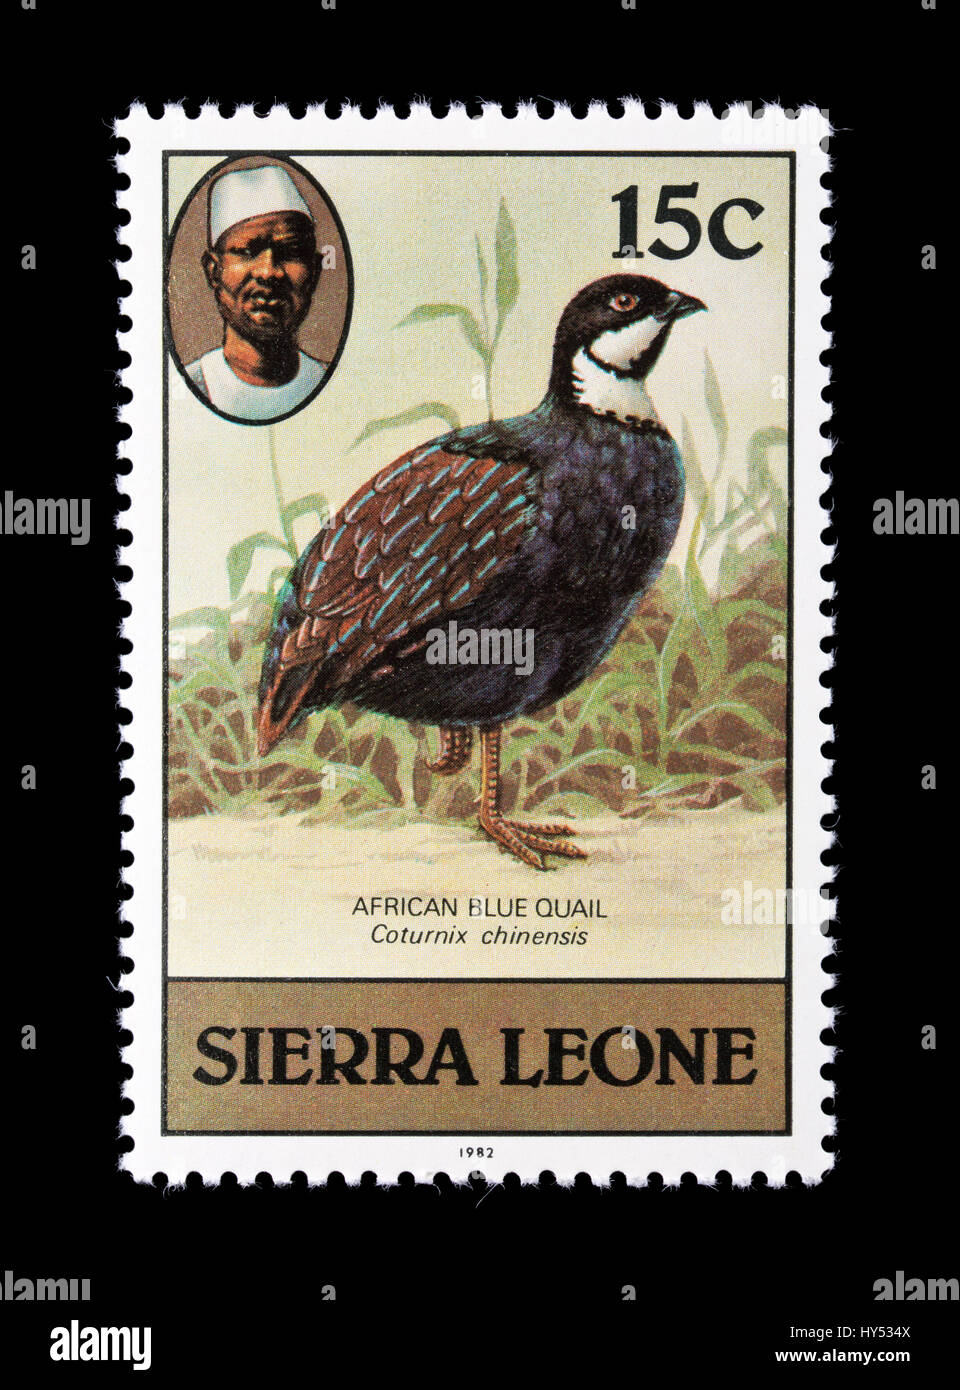 Postage stamp from Sierra Leone depicting an African blue quail (Coturnix chinensis) Stock Photo